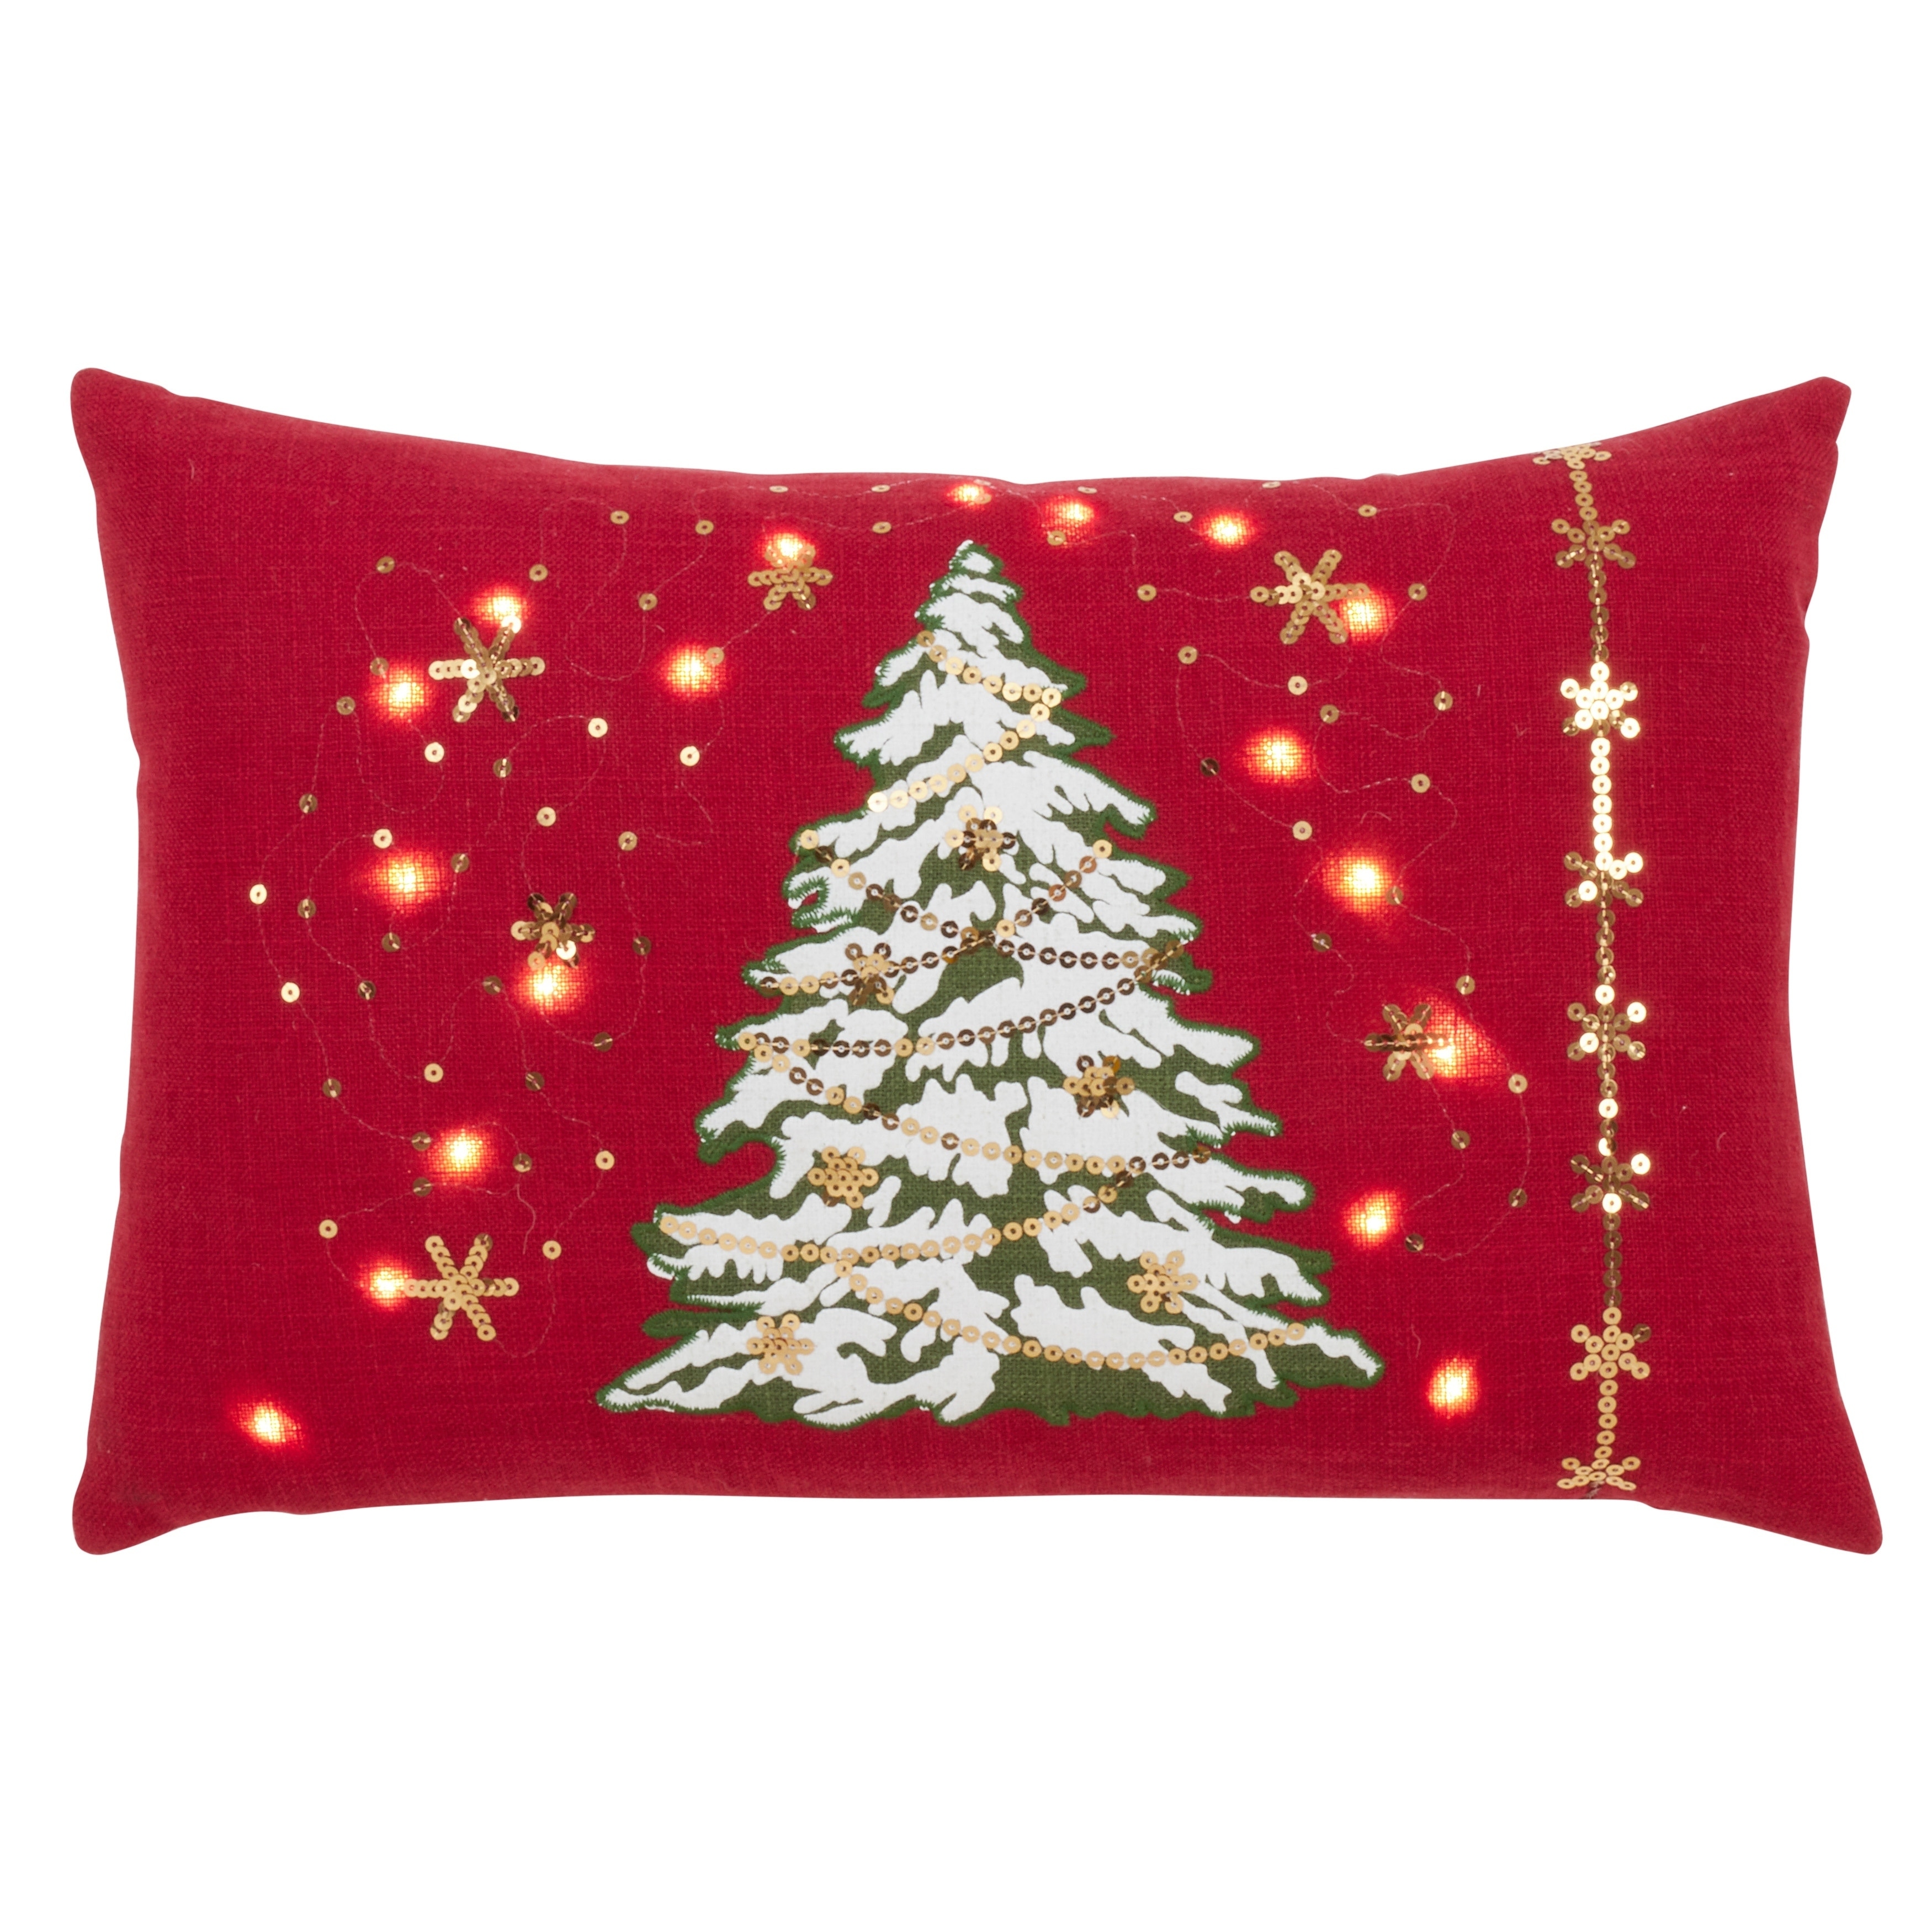 https://ak1.ostkcdn.com/images/products/29826748/Christmas-Tree-Throw-Pillow-With-LED-Lights-70faaa84-c003-4462-a419-ea4c898b61c5.jpg